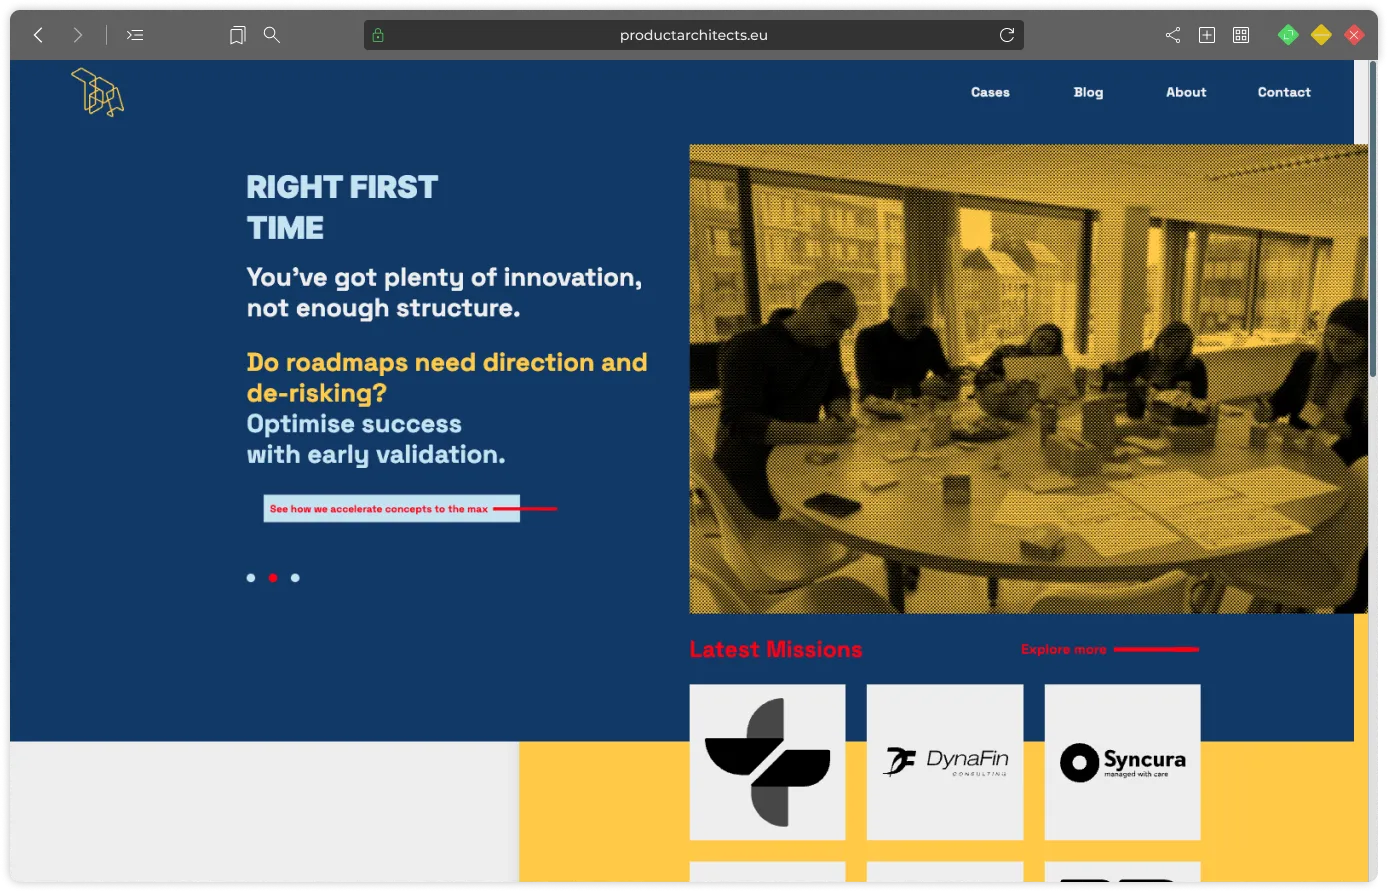 The Product Architects Home Page